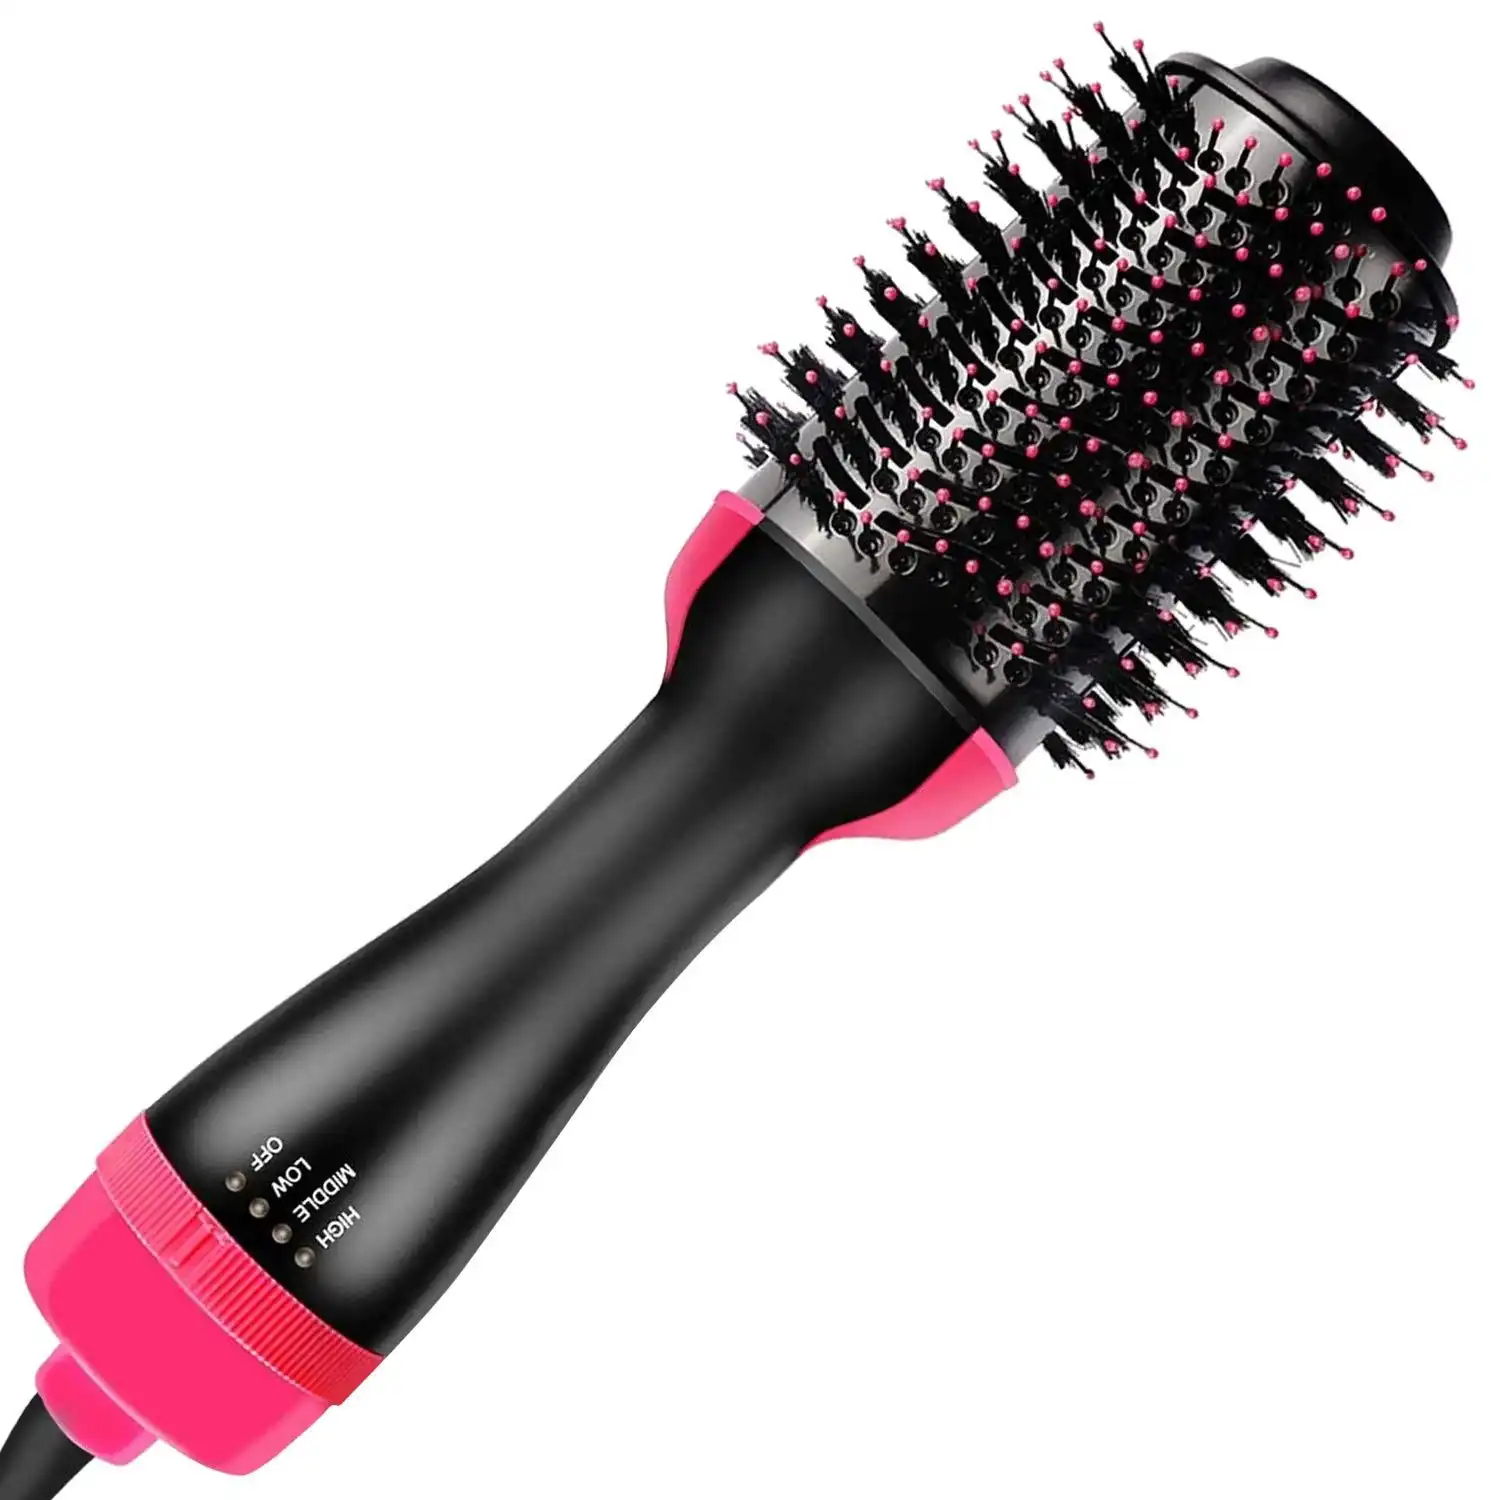 Ausway One-Step Hair Dryer and Volumizer Hot Air Brush, Pink